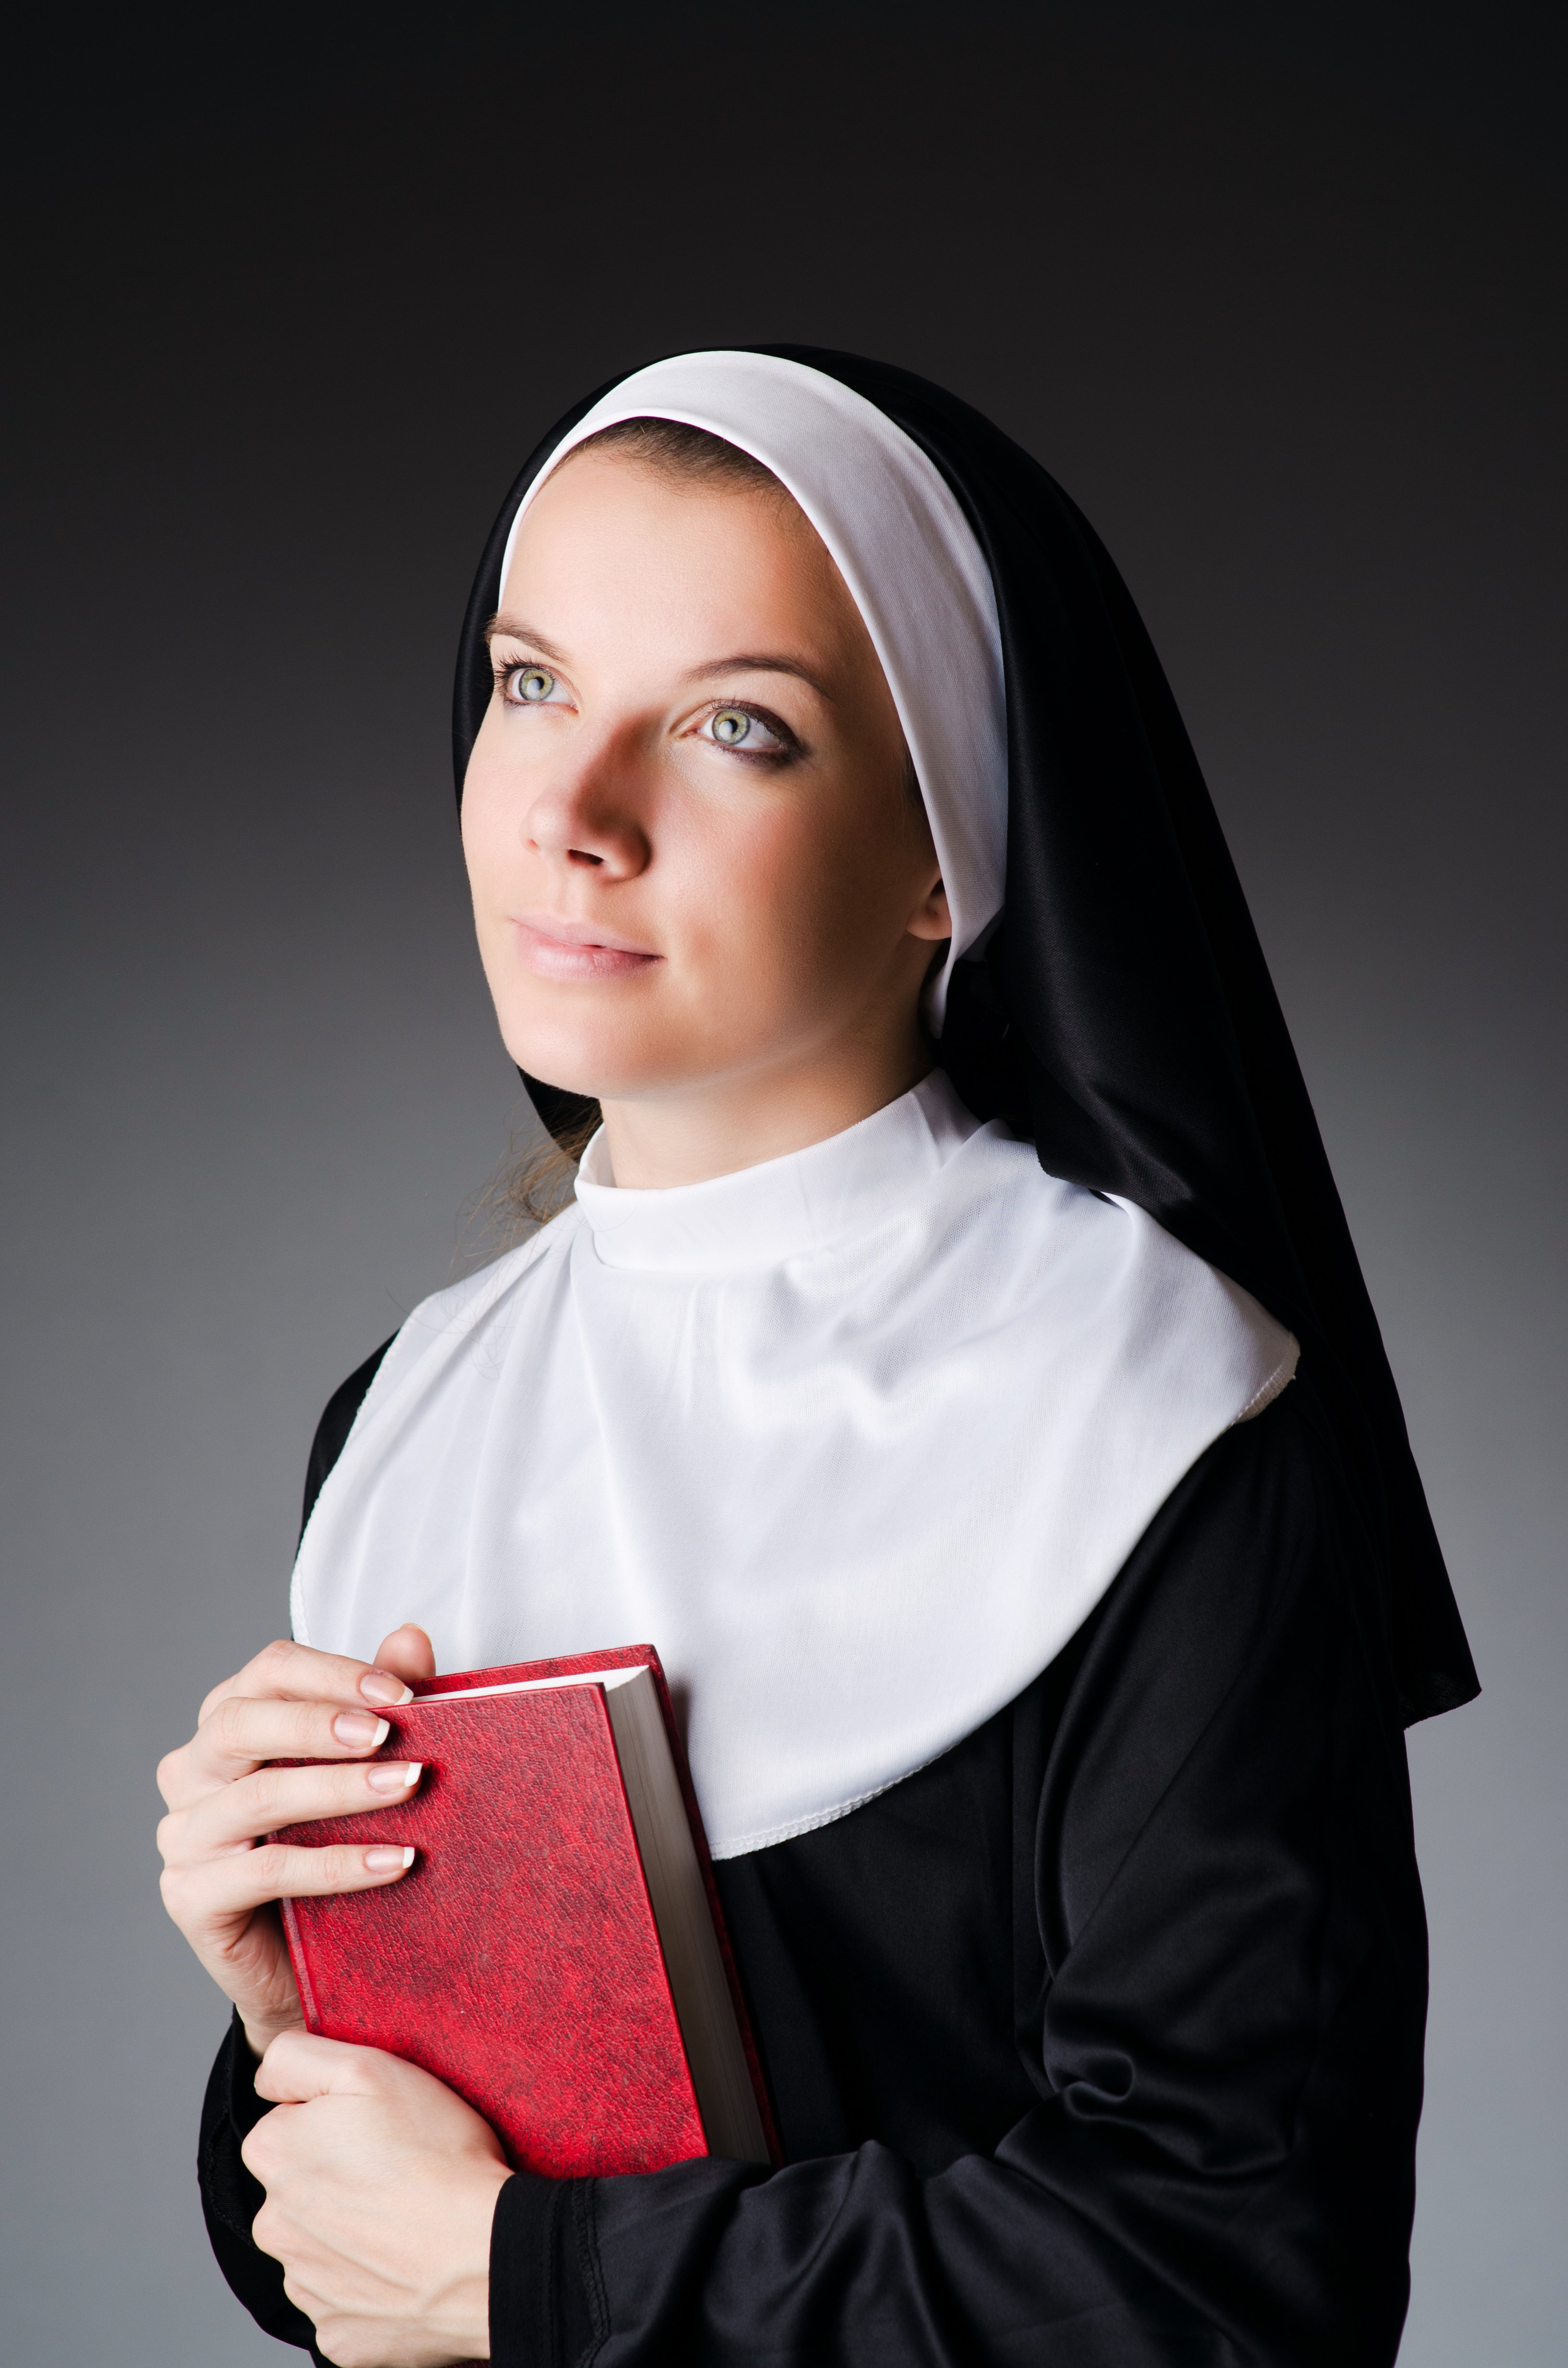 A young nun | Image credit: Shutterstock.